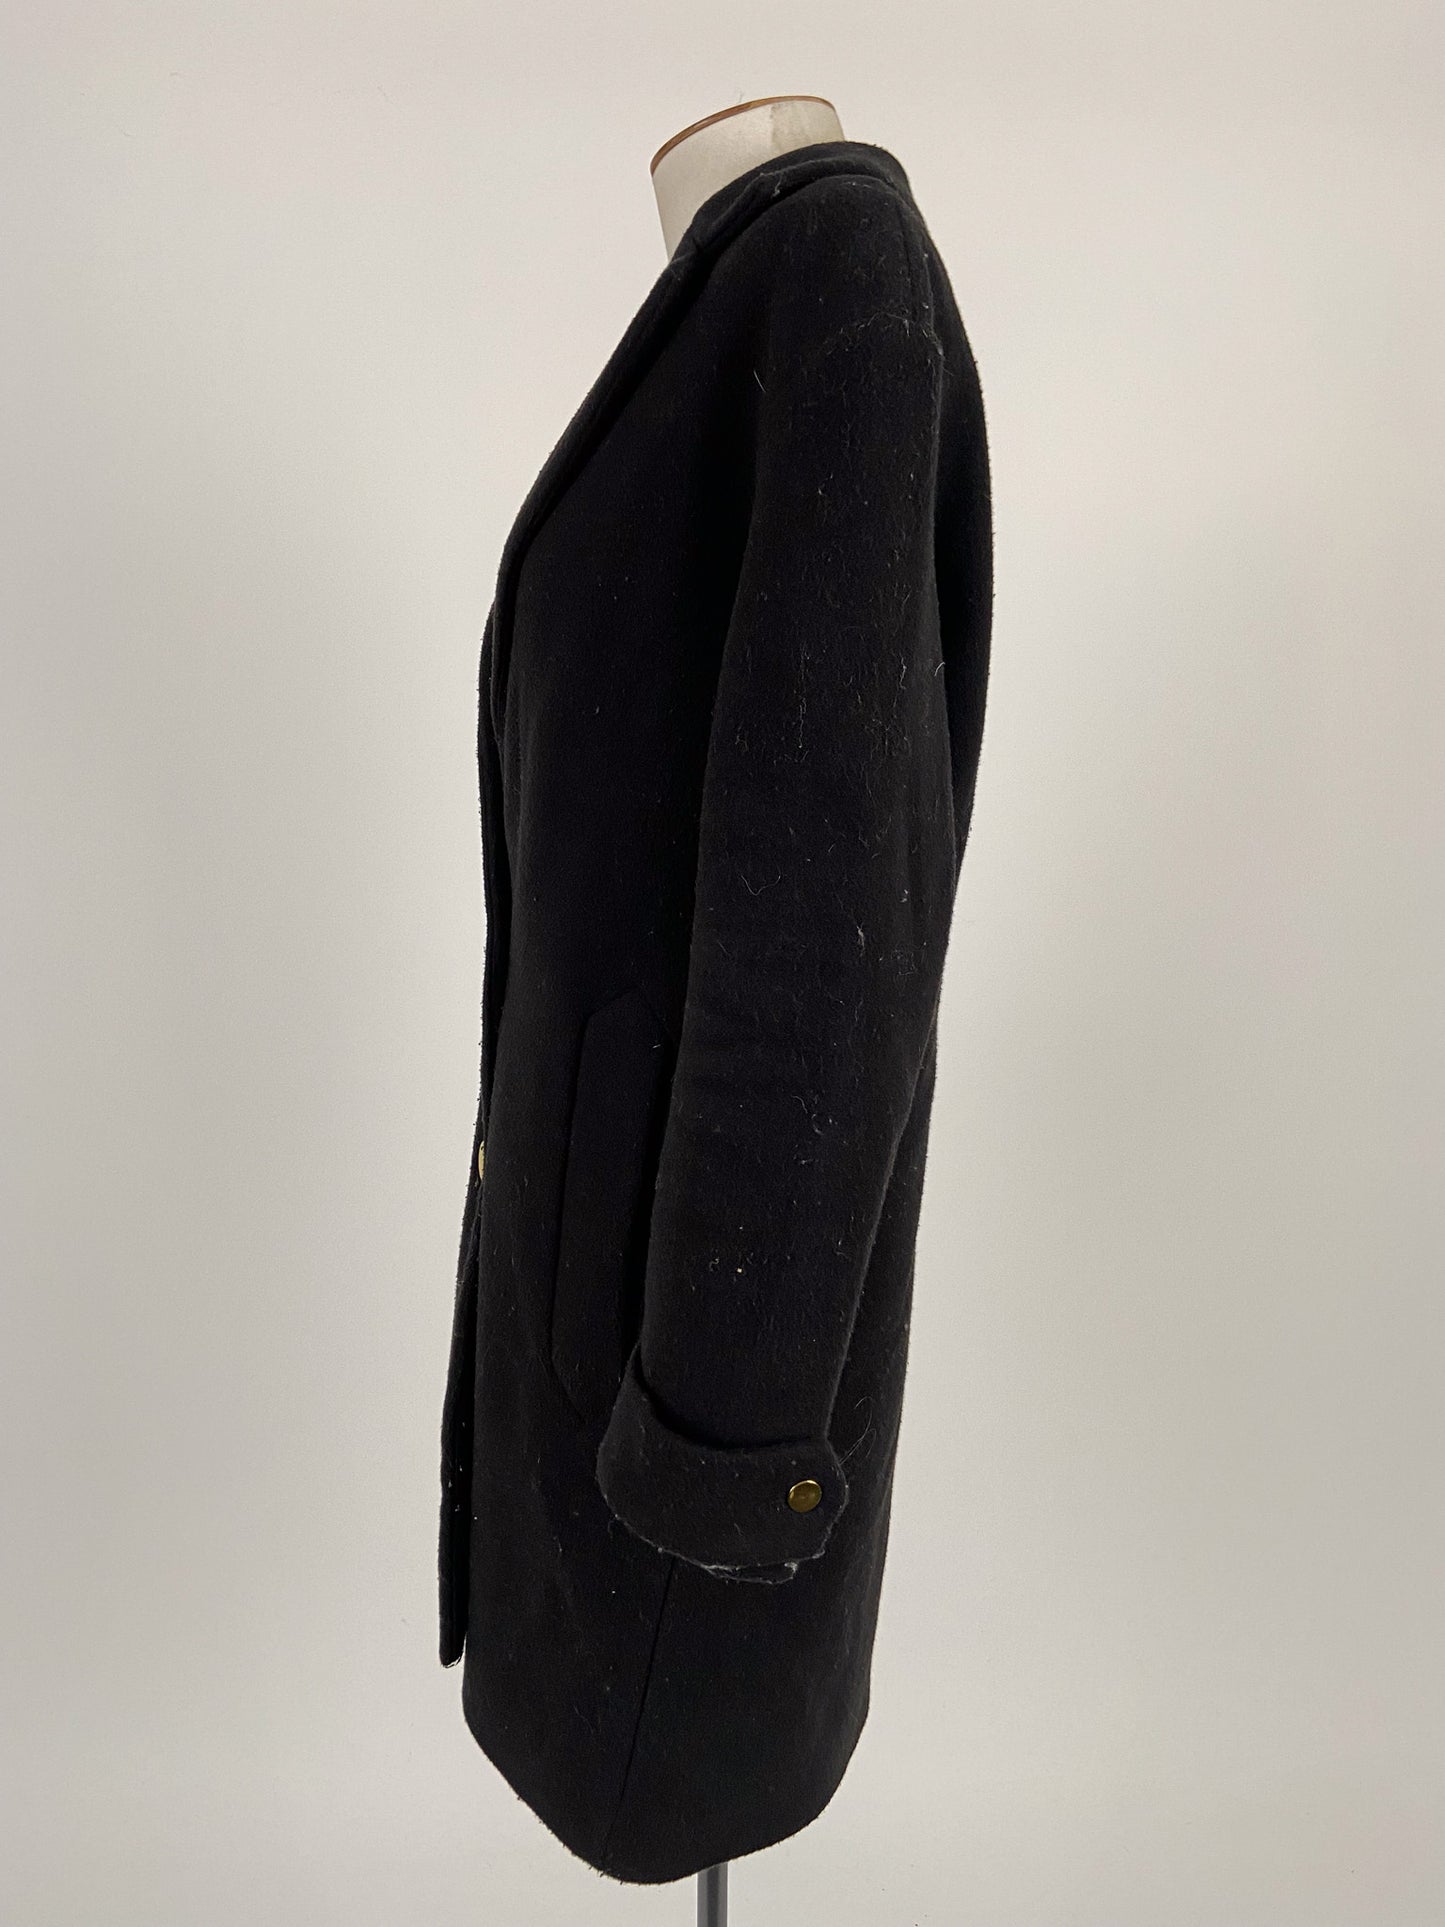 Ruby | Black Casual Coat | Size 6